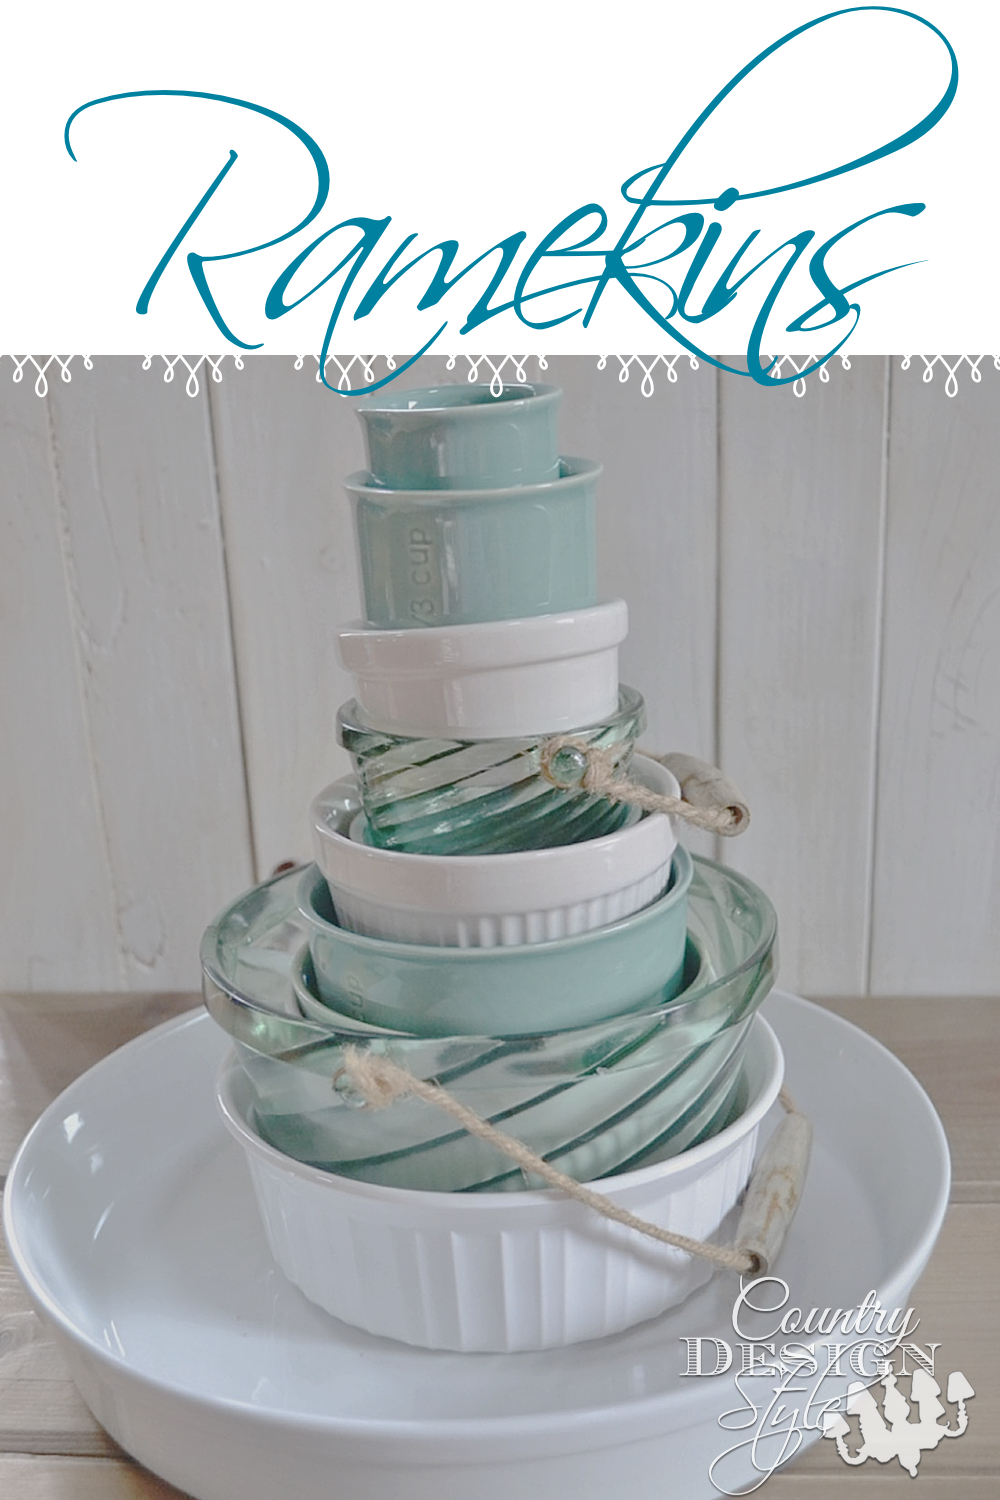 What is your favorite dish to use in the kitchen? Mine has to be ramekins. The all around dish in my home. Serve, bake, eat, measure, decorate, and even LOSE WEIGHT!!! Yep, they helped me lose weight. Country Design Style.